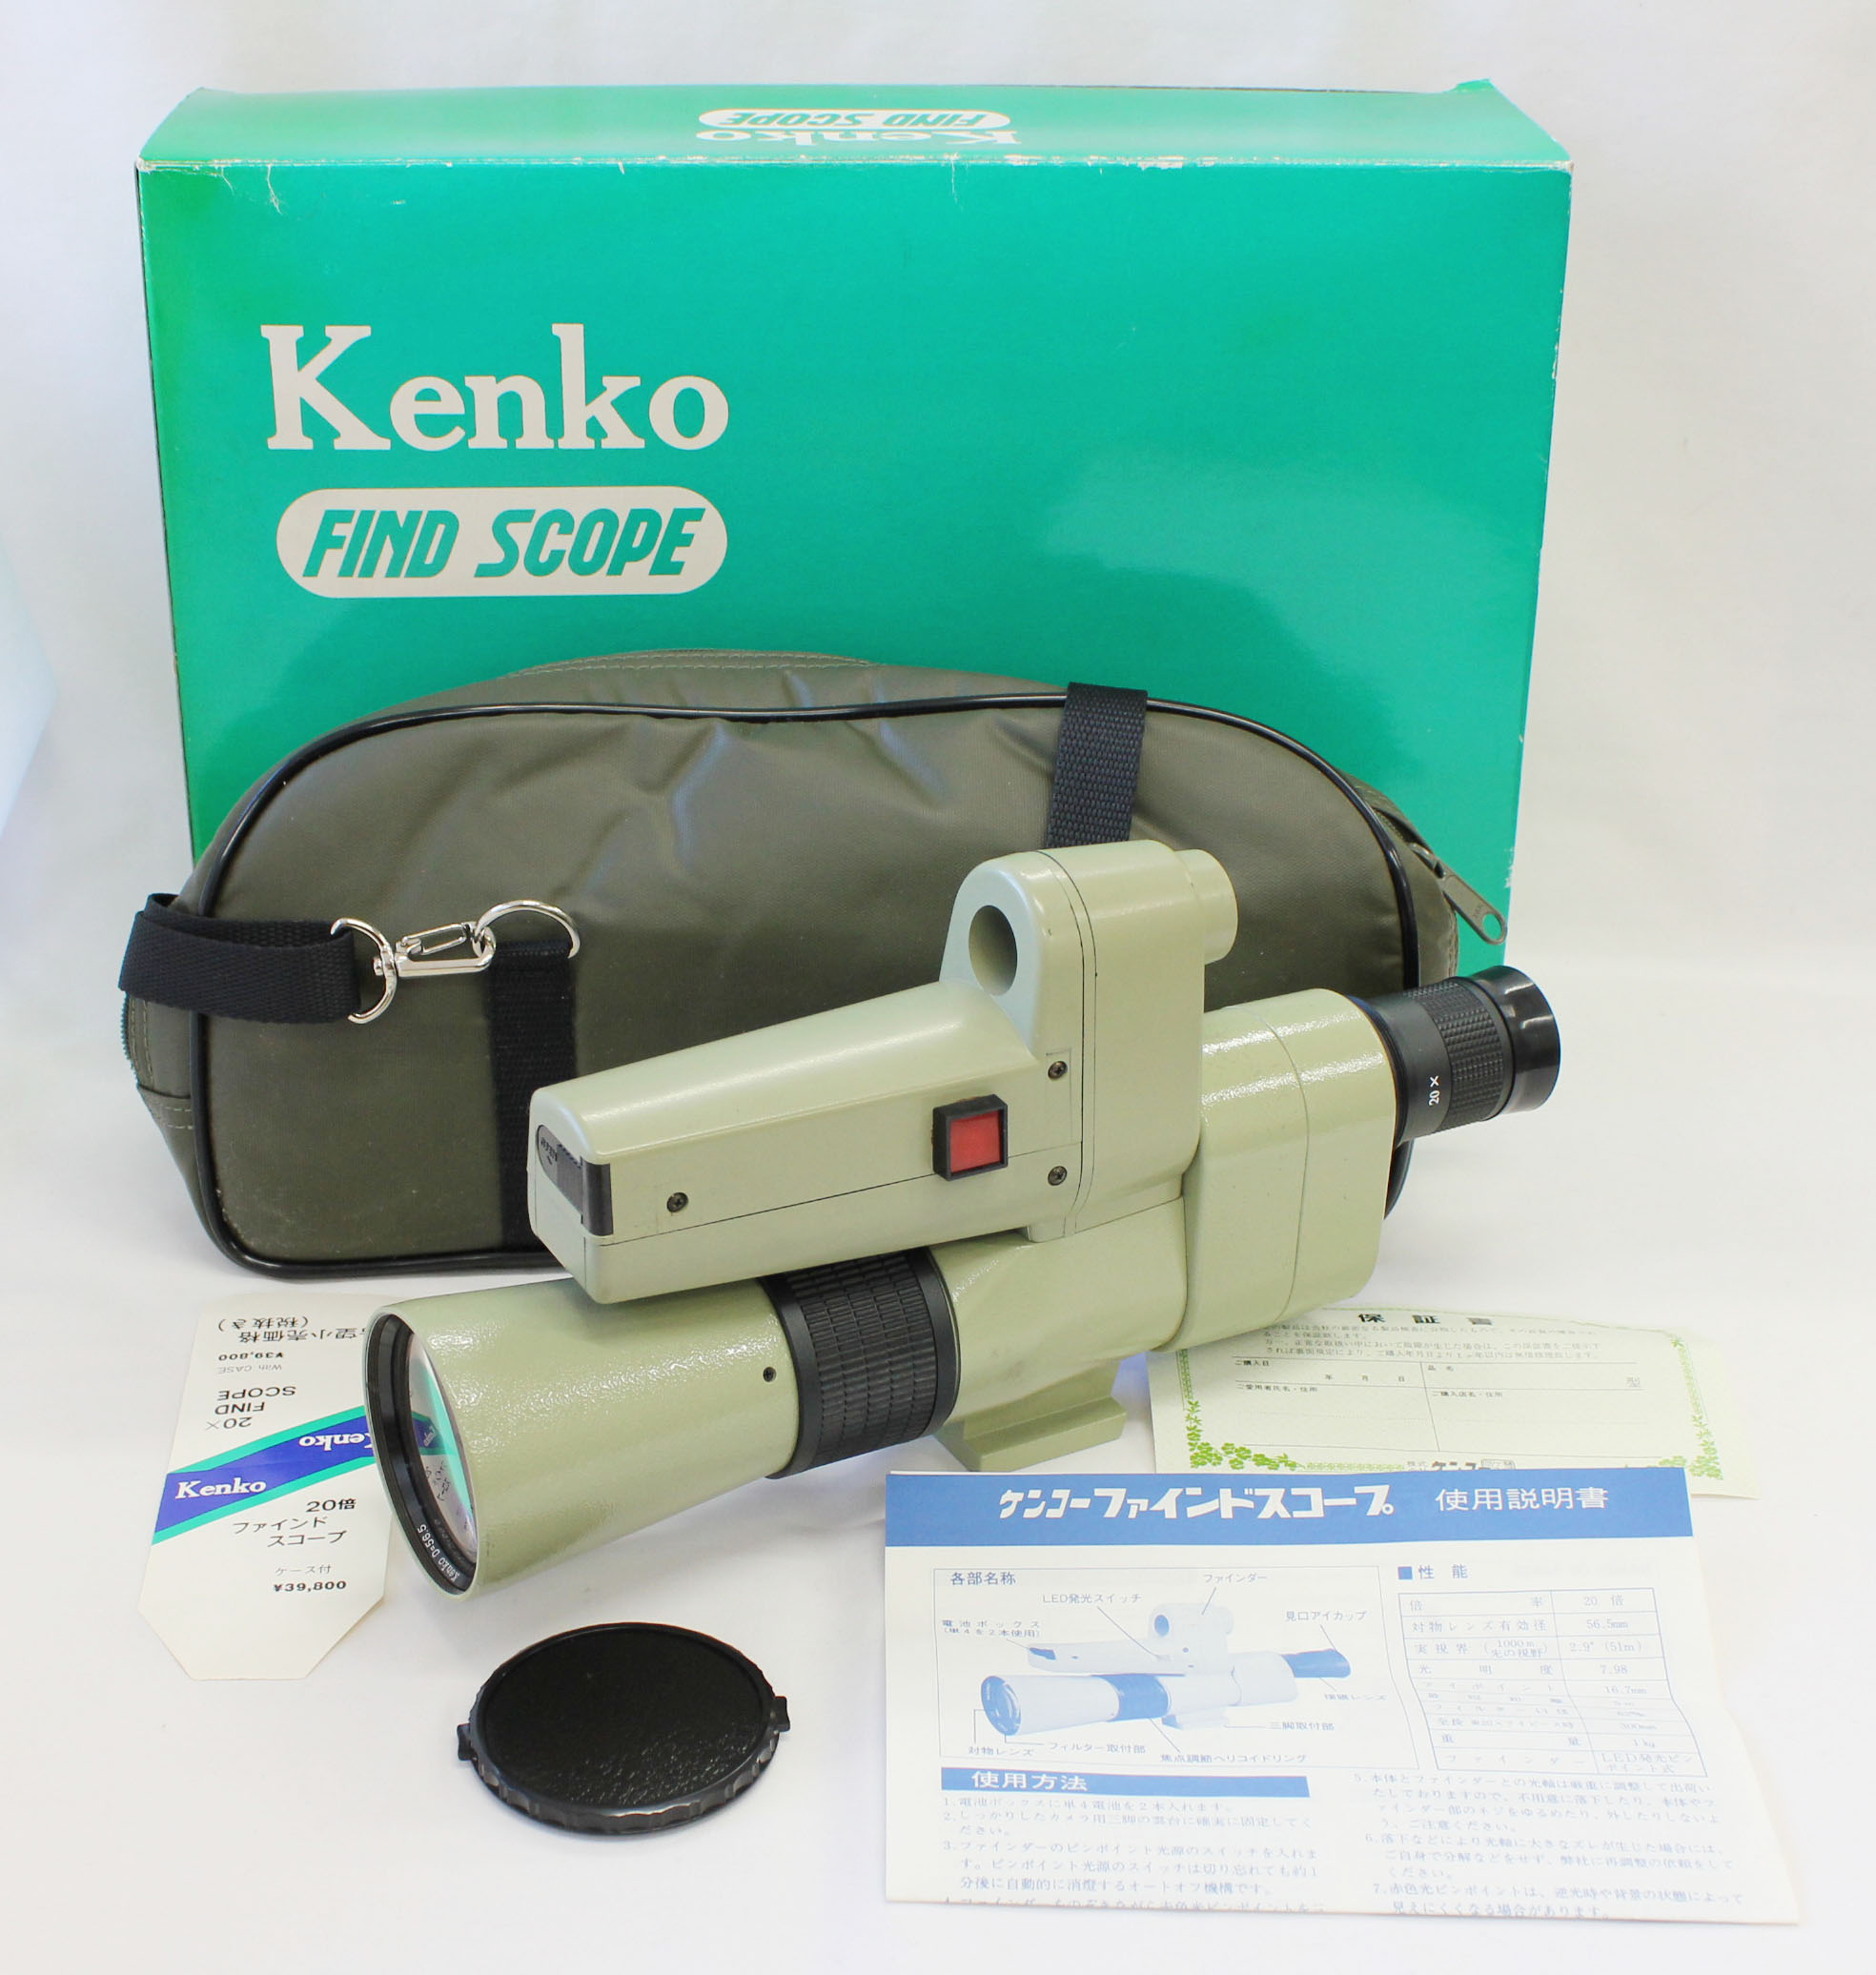 Kenko Find Scope Spotting Scope 20x D=56.5 with LED Aiming View Finder in Case / Box from Japan